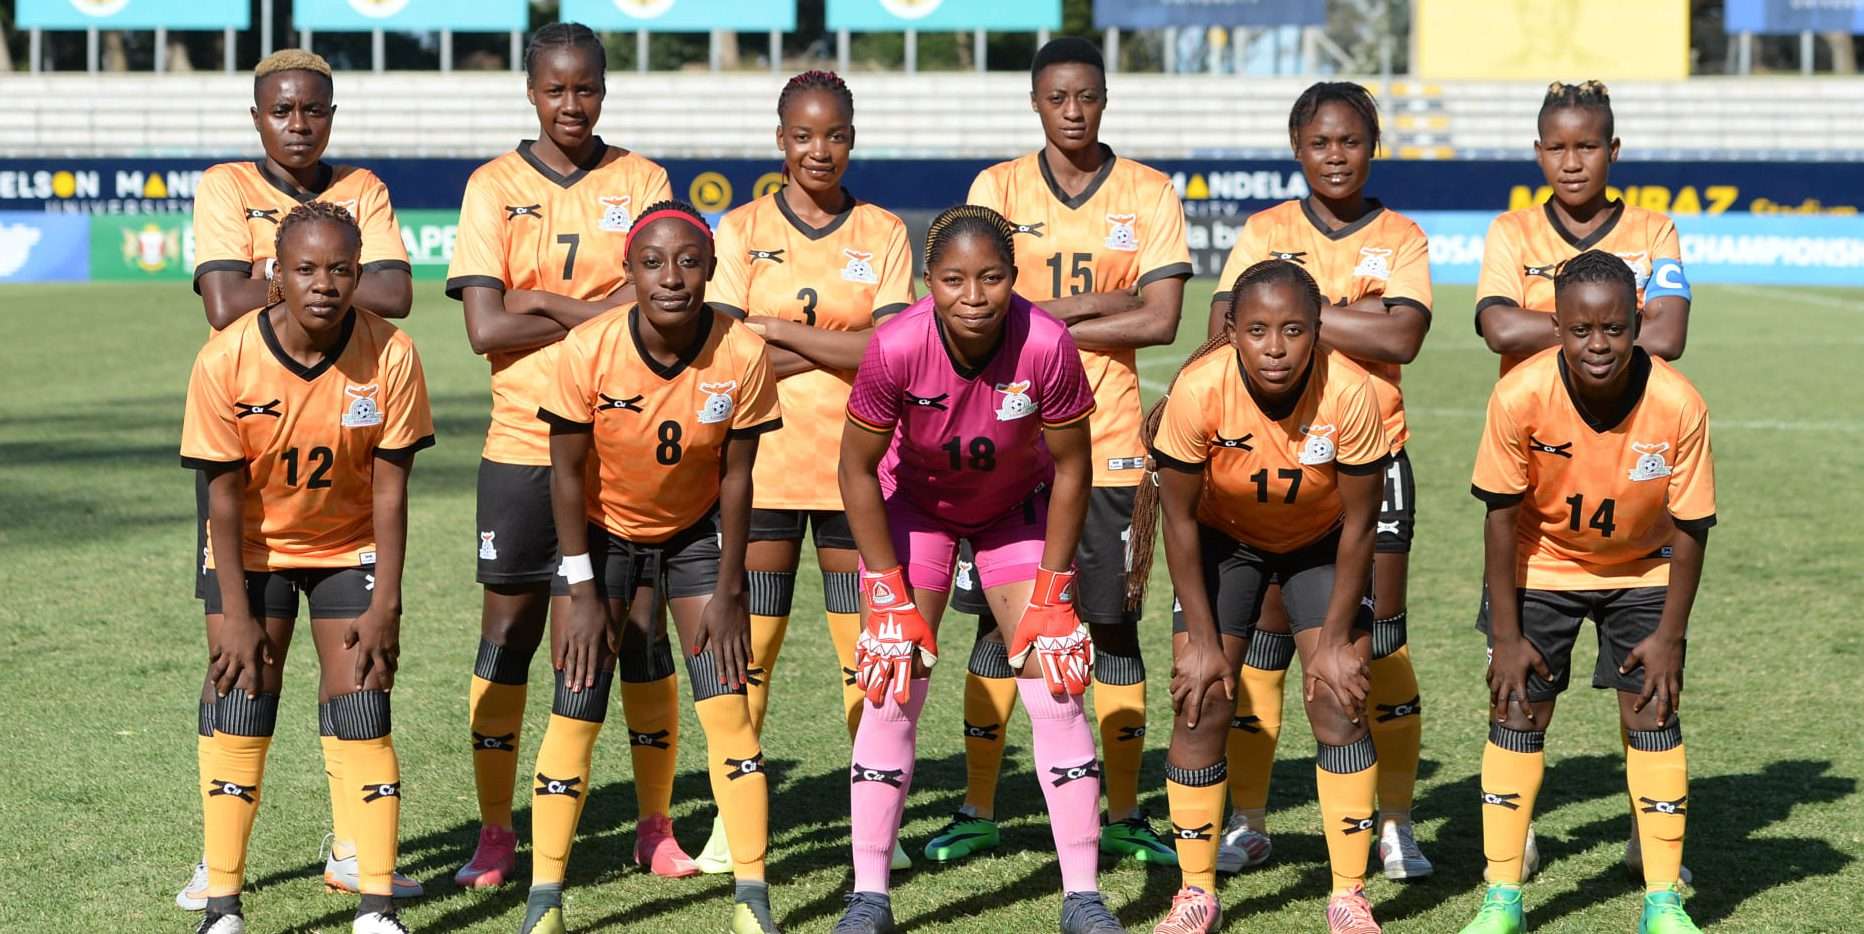 AWCON Qualifiers on a slow start for the Copper Queens